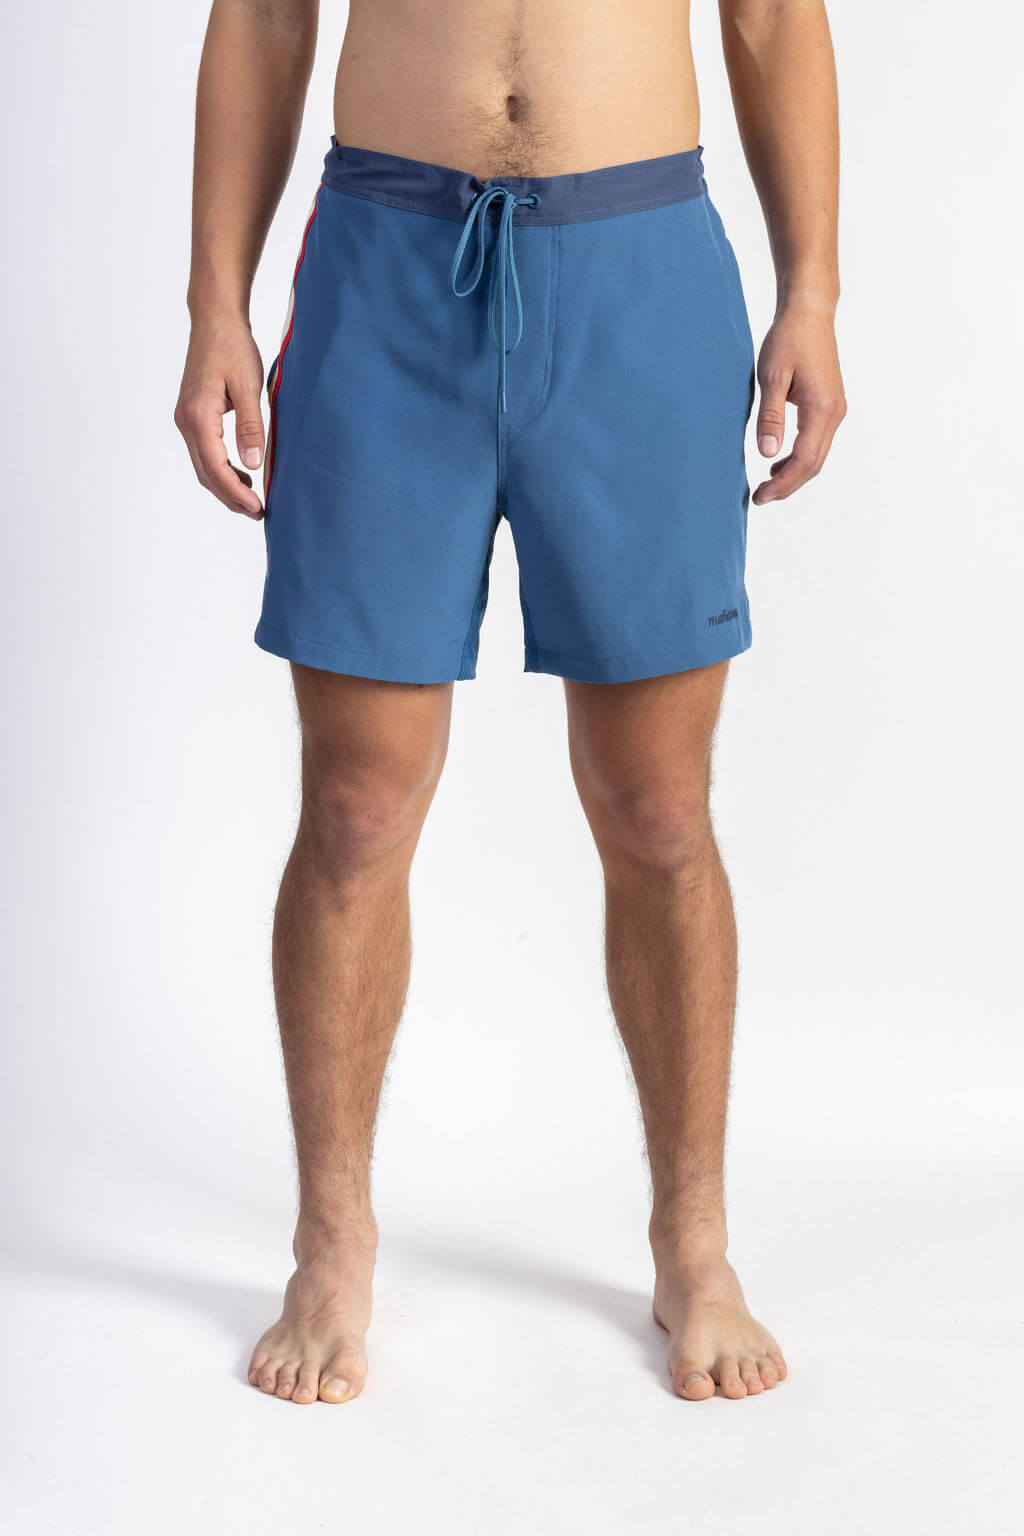 A picture of man wearing shorts